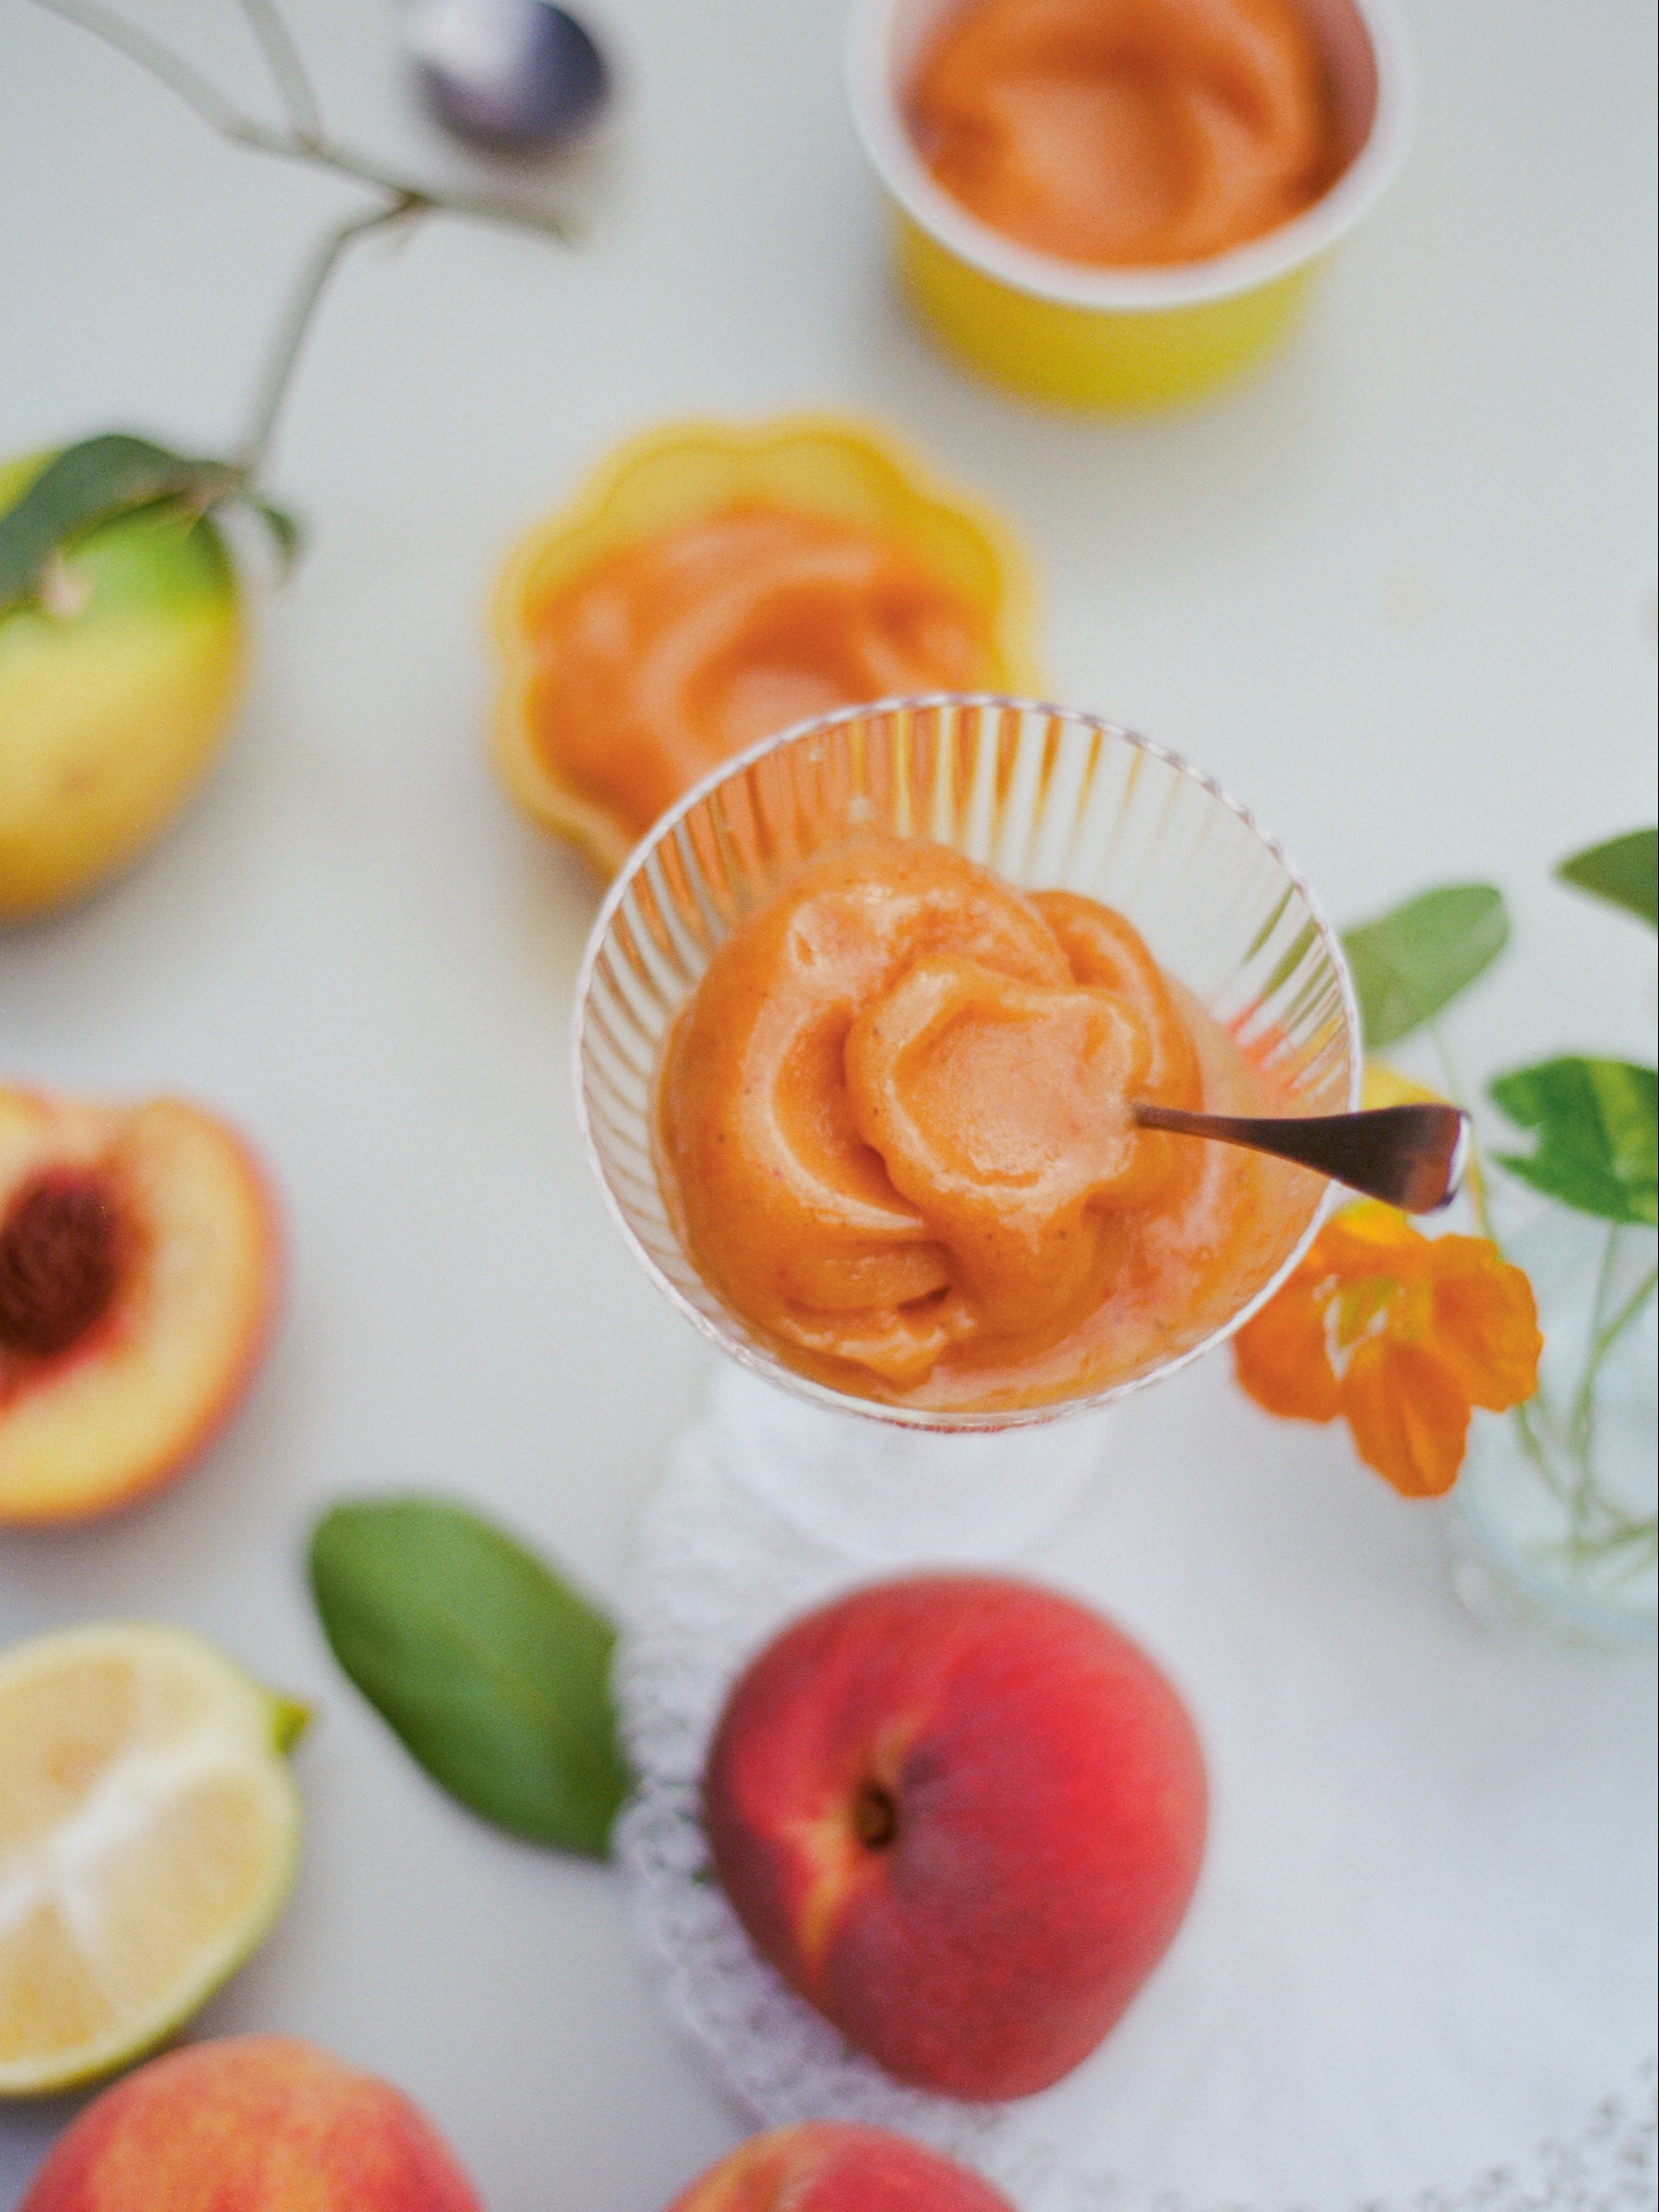 The velvety peach purée gives this light sorbet substantial body